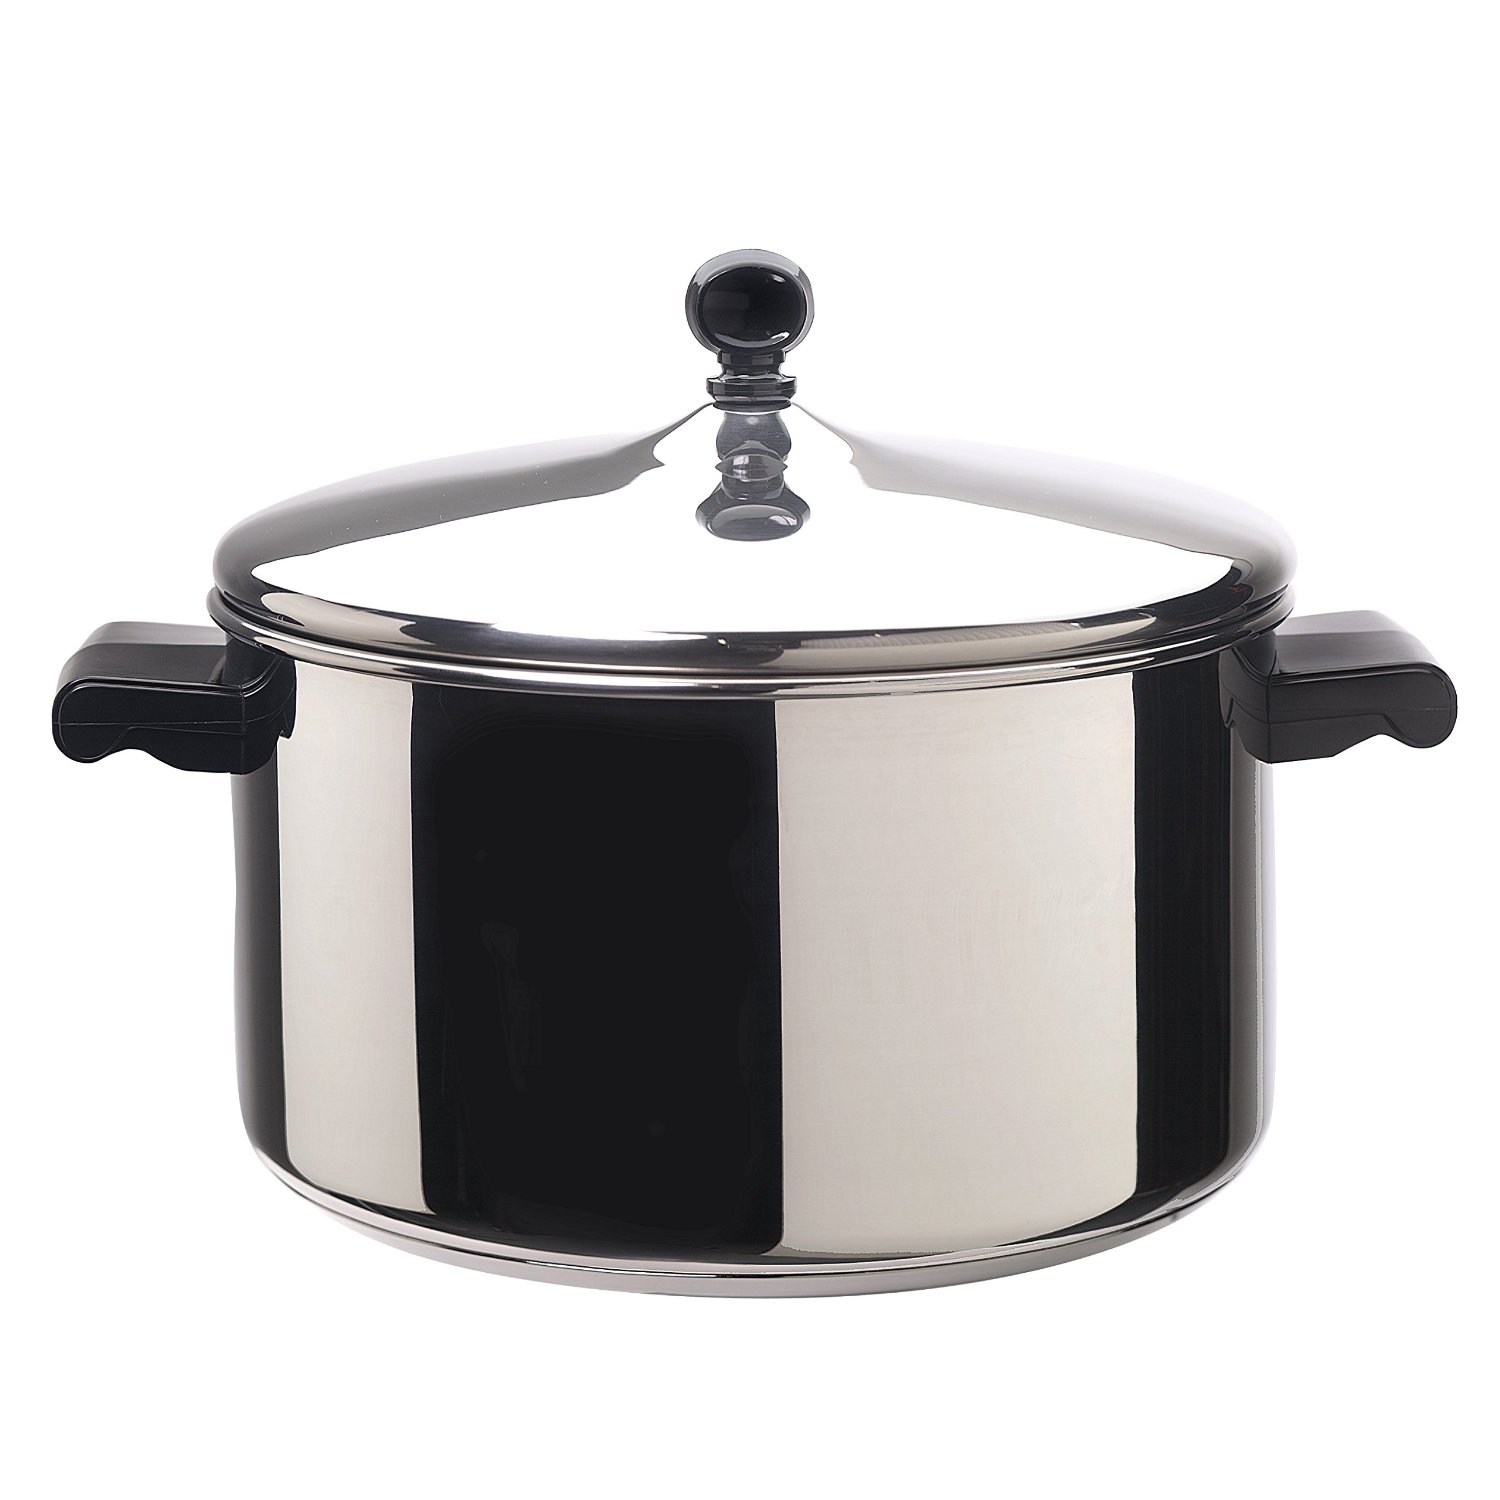 Farberware Classic Stainless Steel 6-Quart Covered Stockpot - Stainless Steel Pot